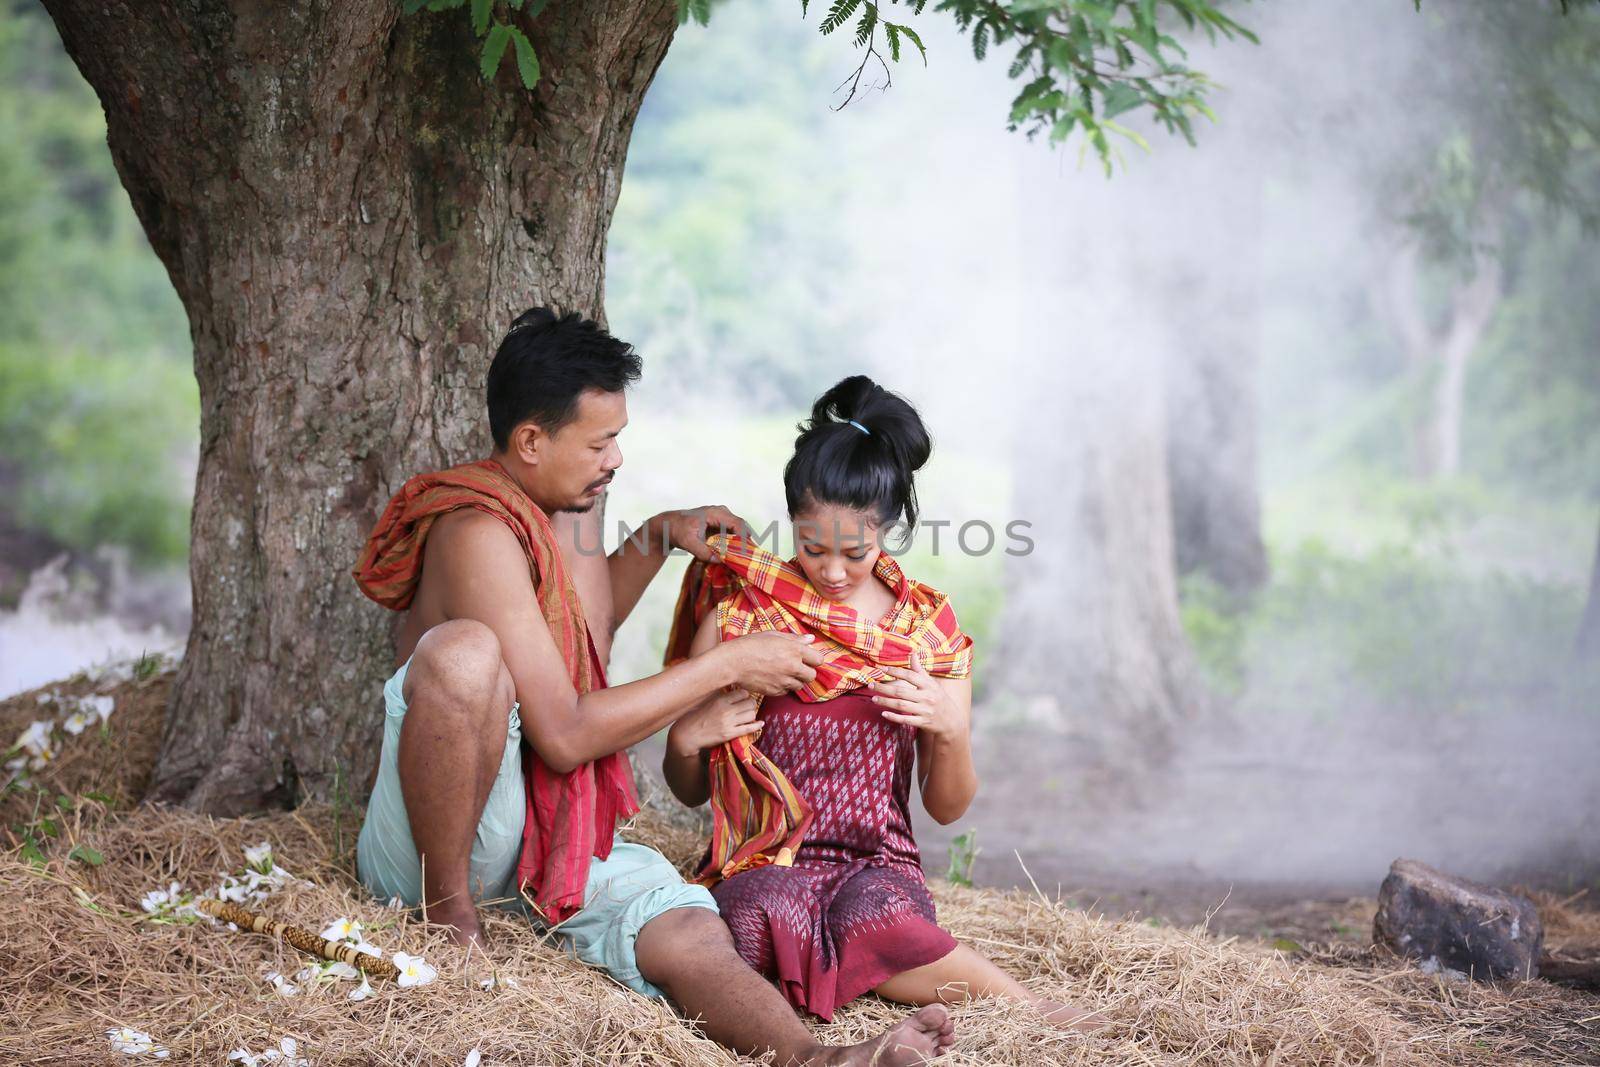 Couple love of Asian Young man and women sitting under tree against buffalo and natural background, rural way of life in the Northeast of Thailand. A young man was blowing a bamboo mouth organ to his lover.